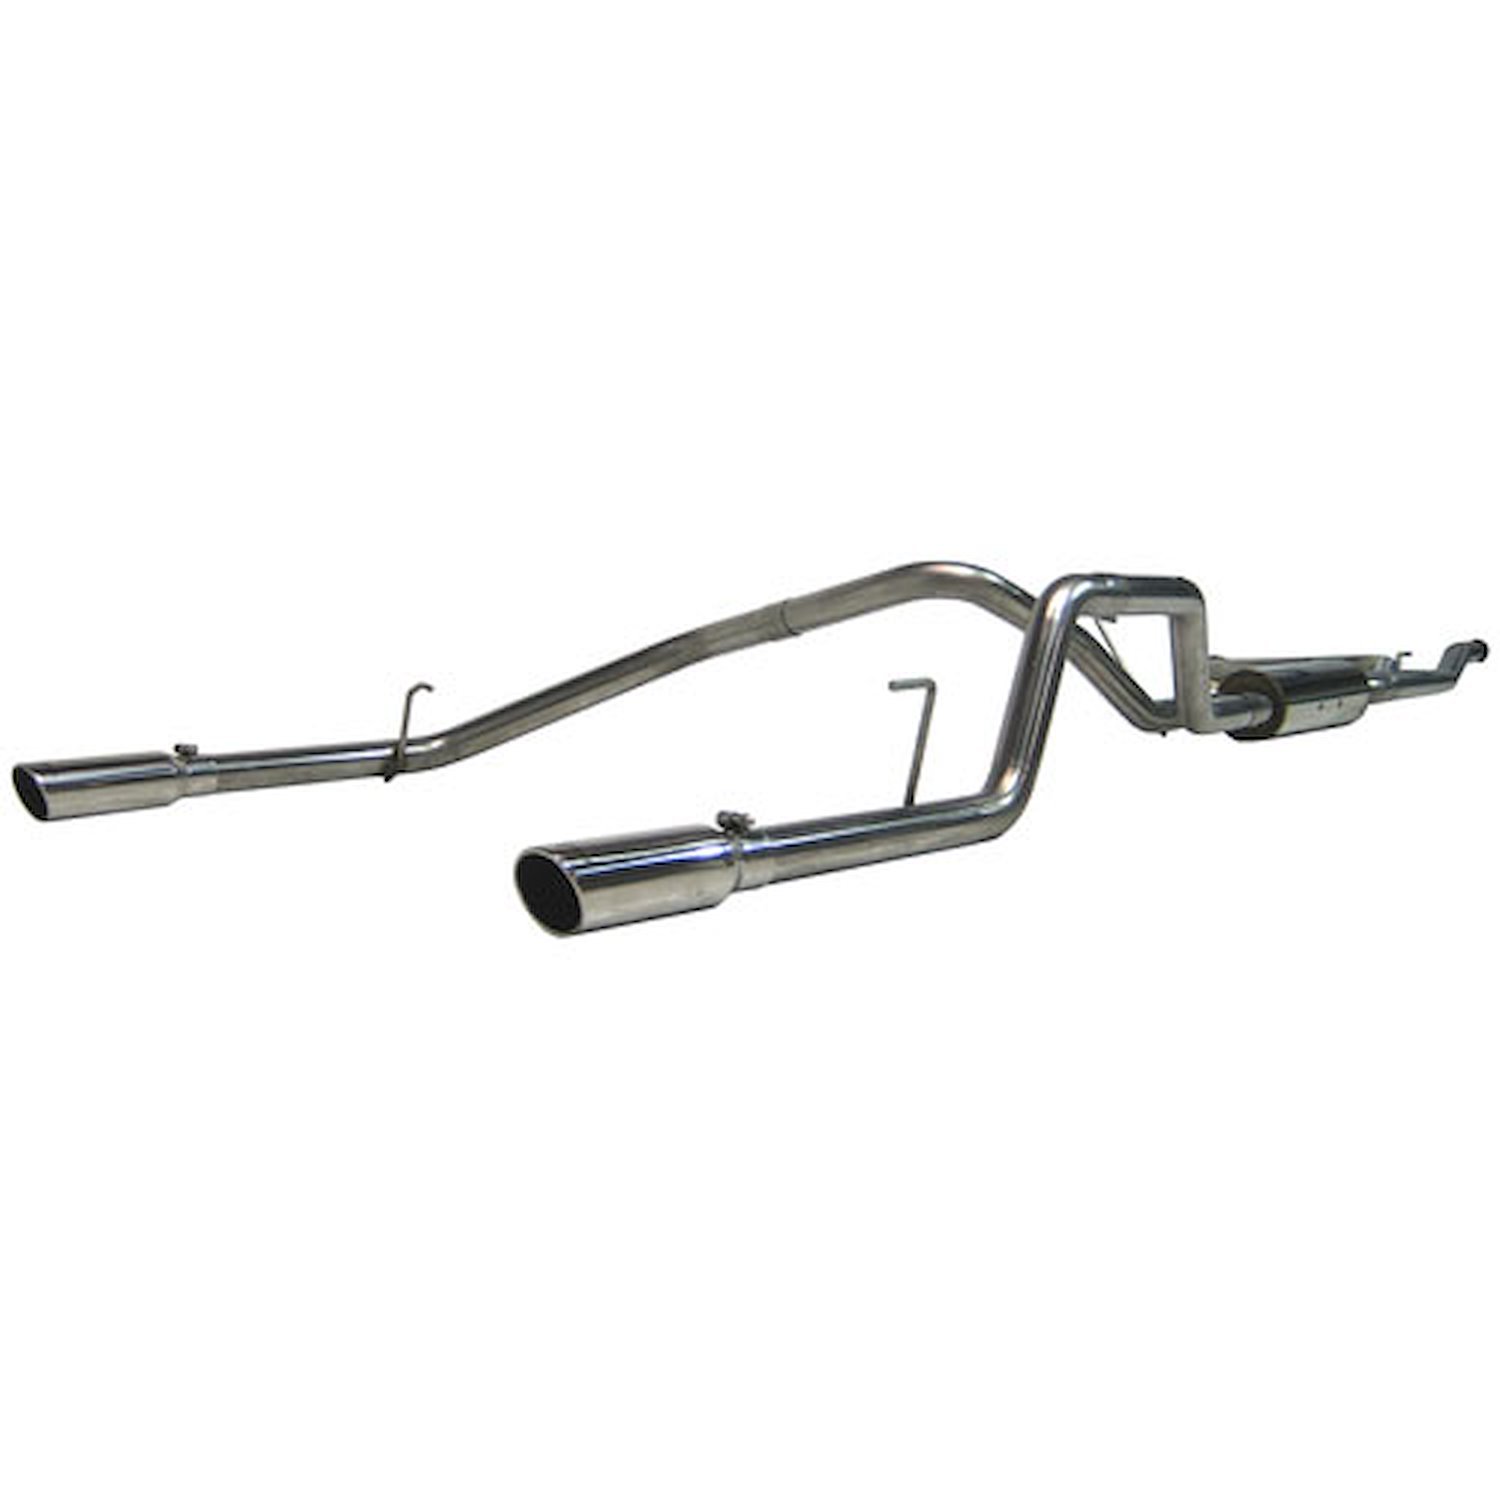 XP Series Exhaust System 2004-2011 for Nissan Titan 5.6L